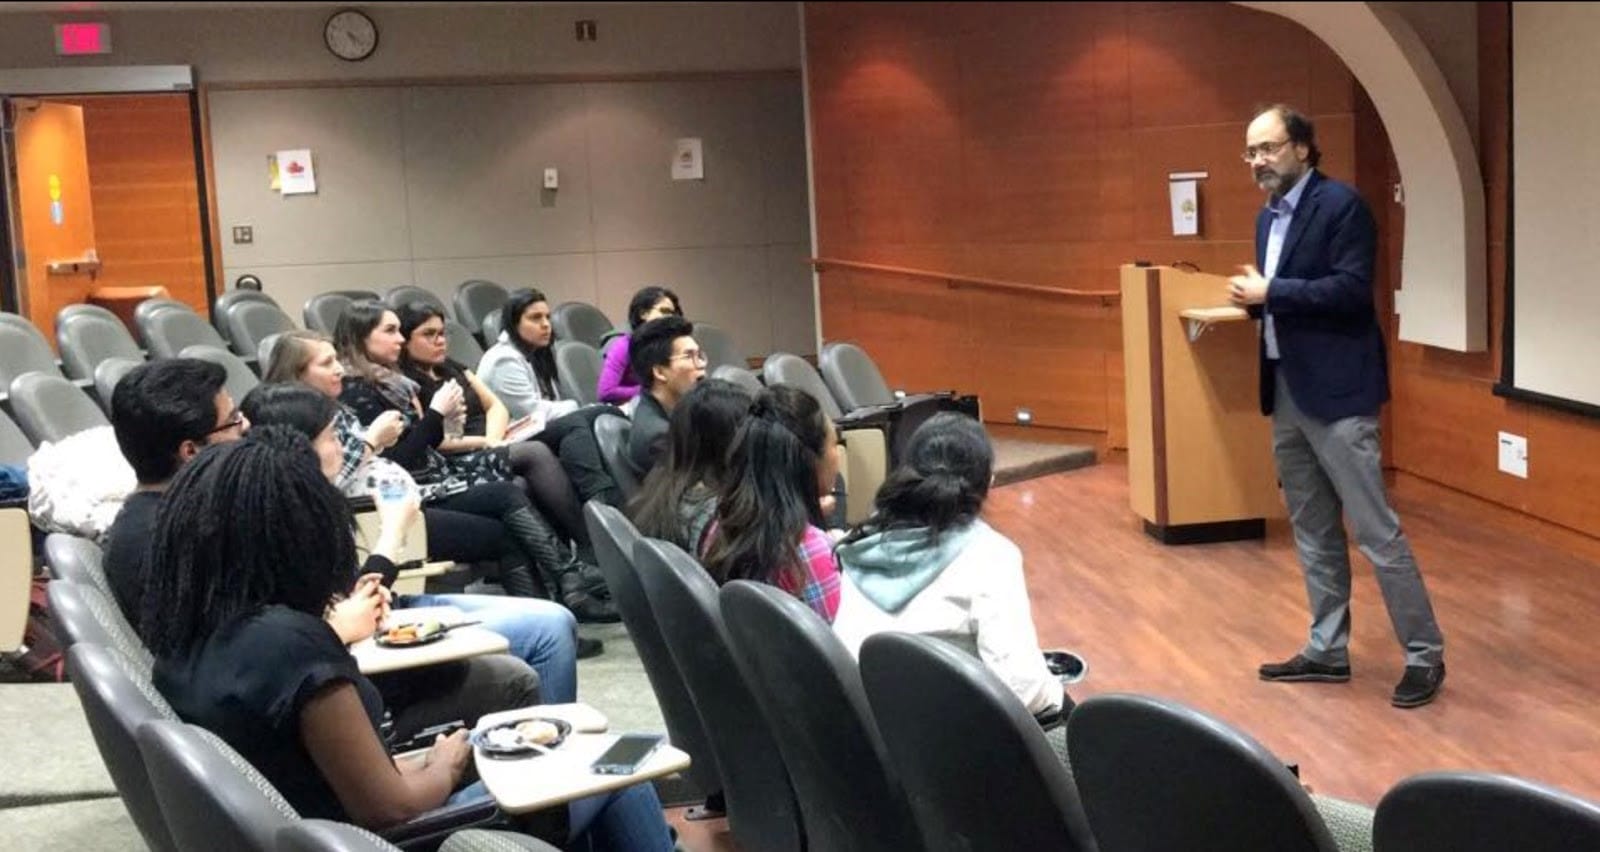 A man lecturing to a diverse group of students in a university classroom.